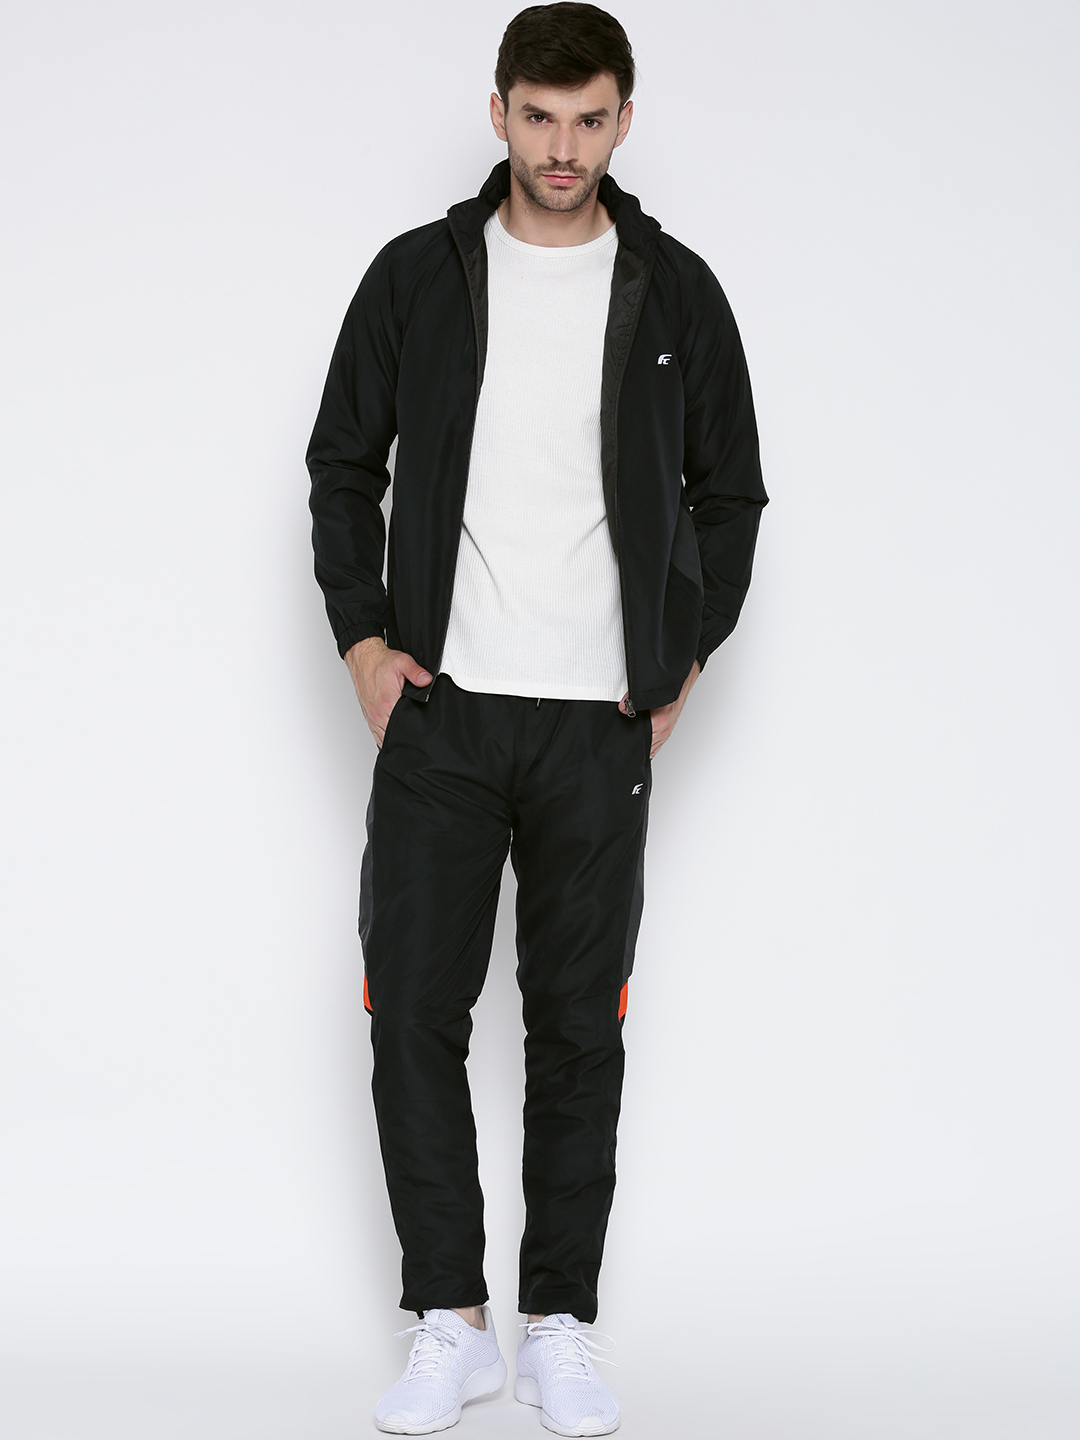 Mens Black Tracksuit at Rs 430/piece, Men Tracksuit in Ludhiana